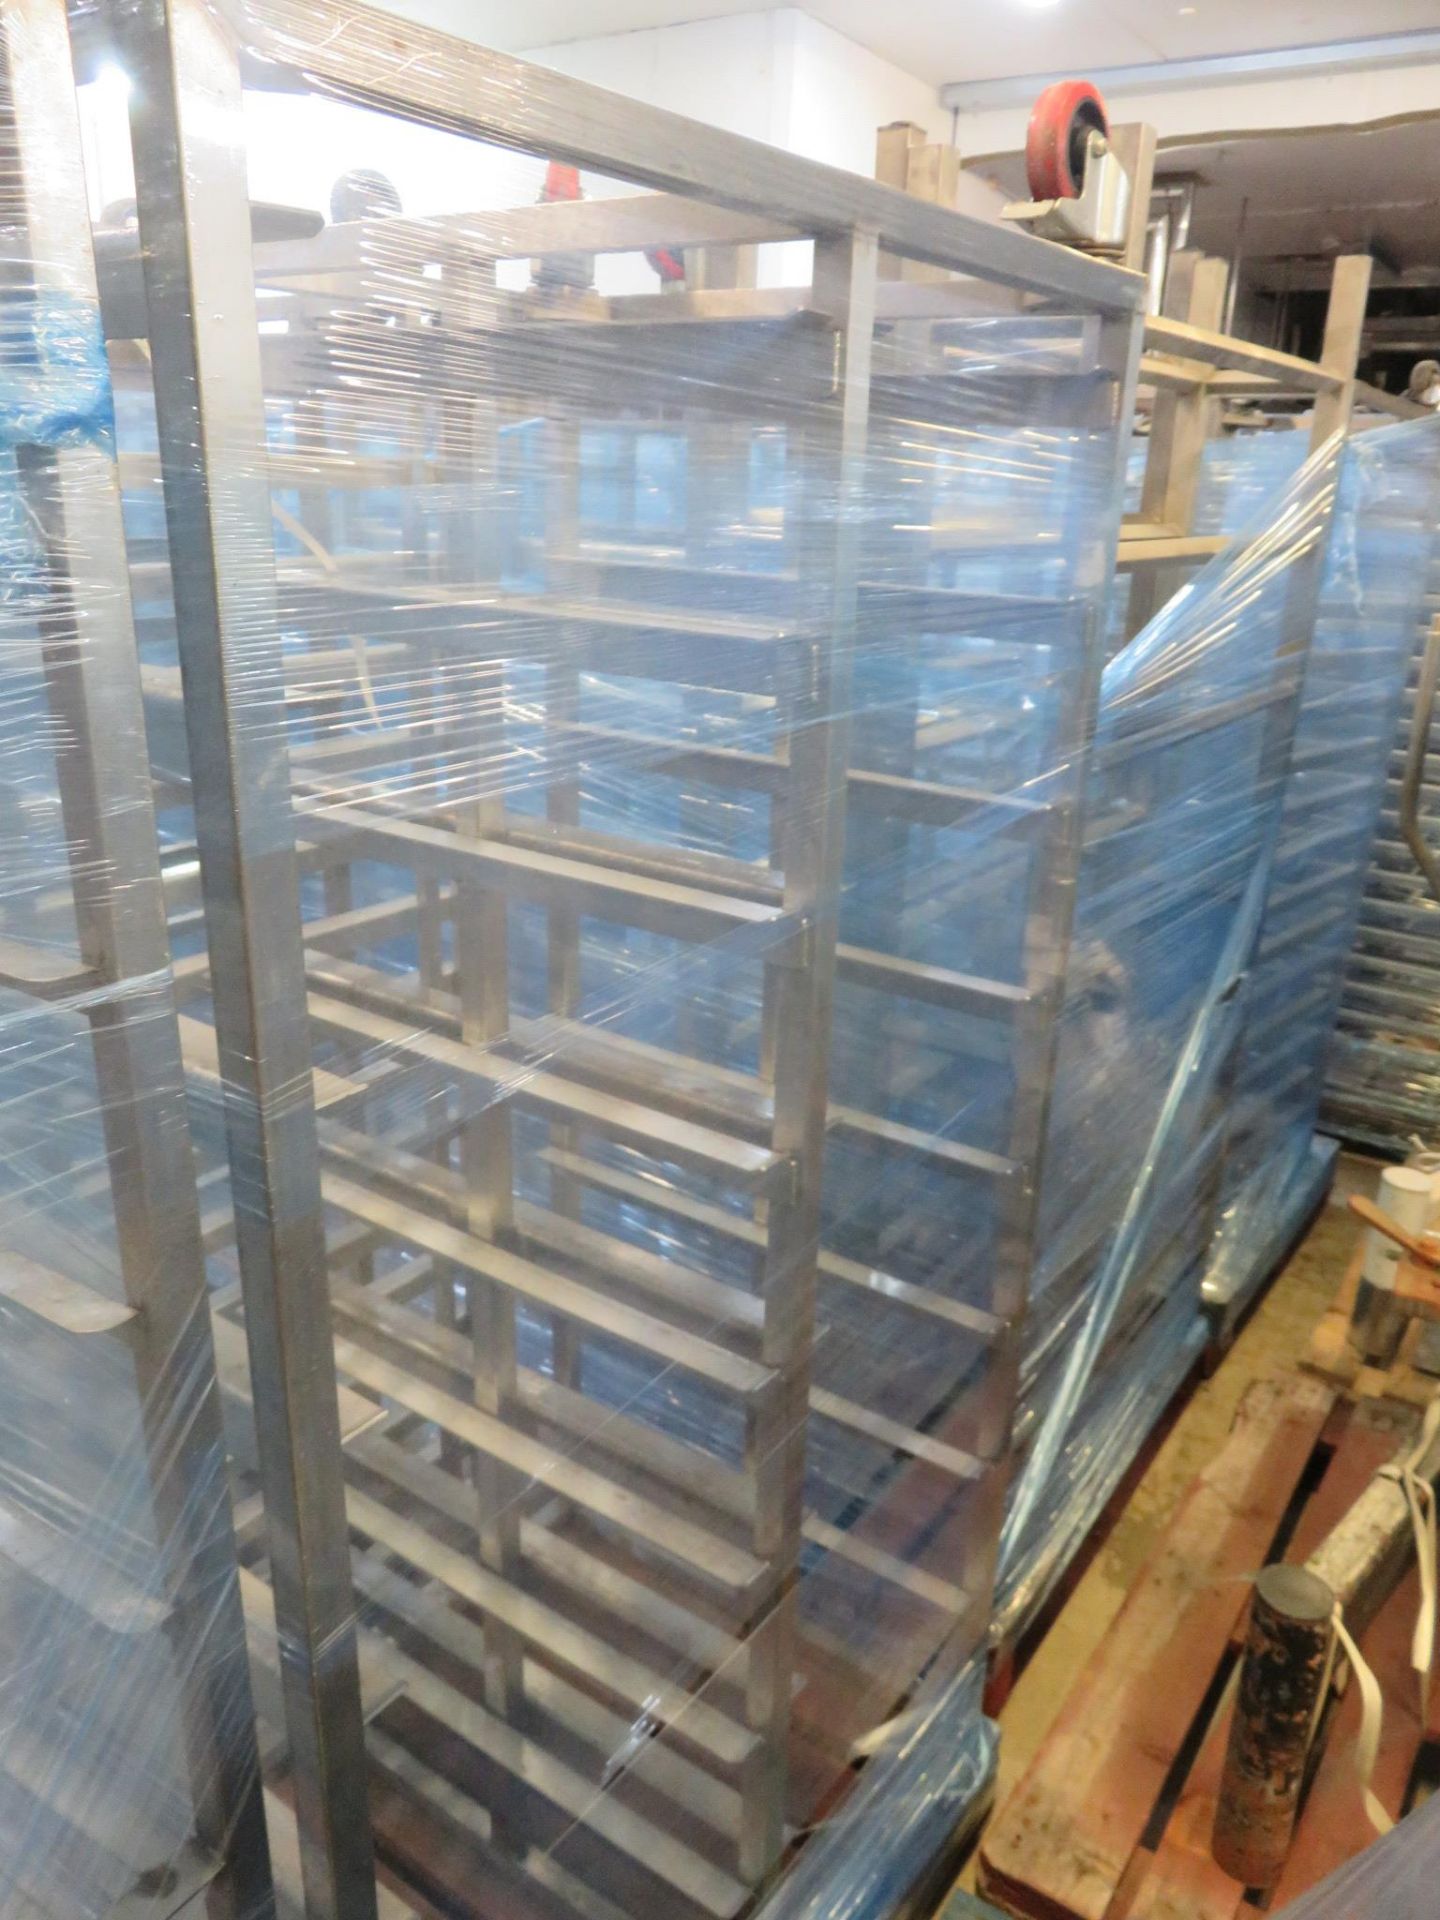 3 x S/s Racks: - 2 x S/s Racks capable of taking 10trays.Approx.420mm x 660mm x 1.7metres high.LO£20 - Image 2 of 2